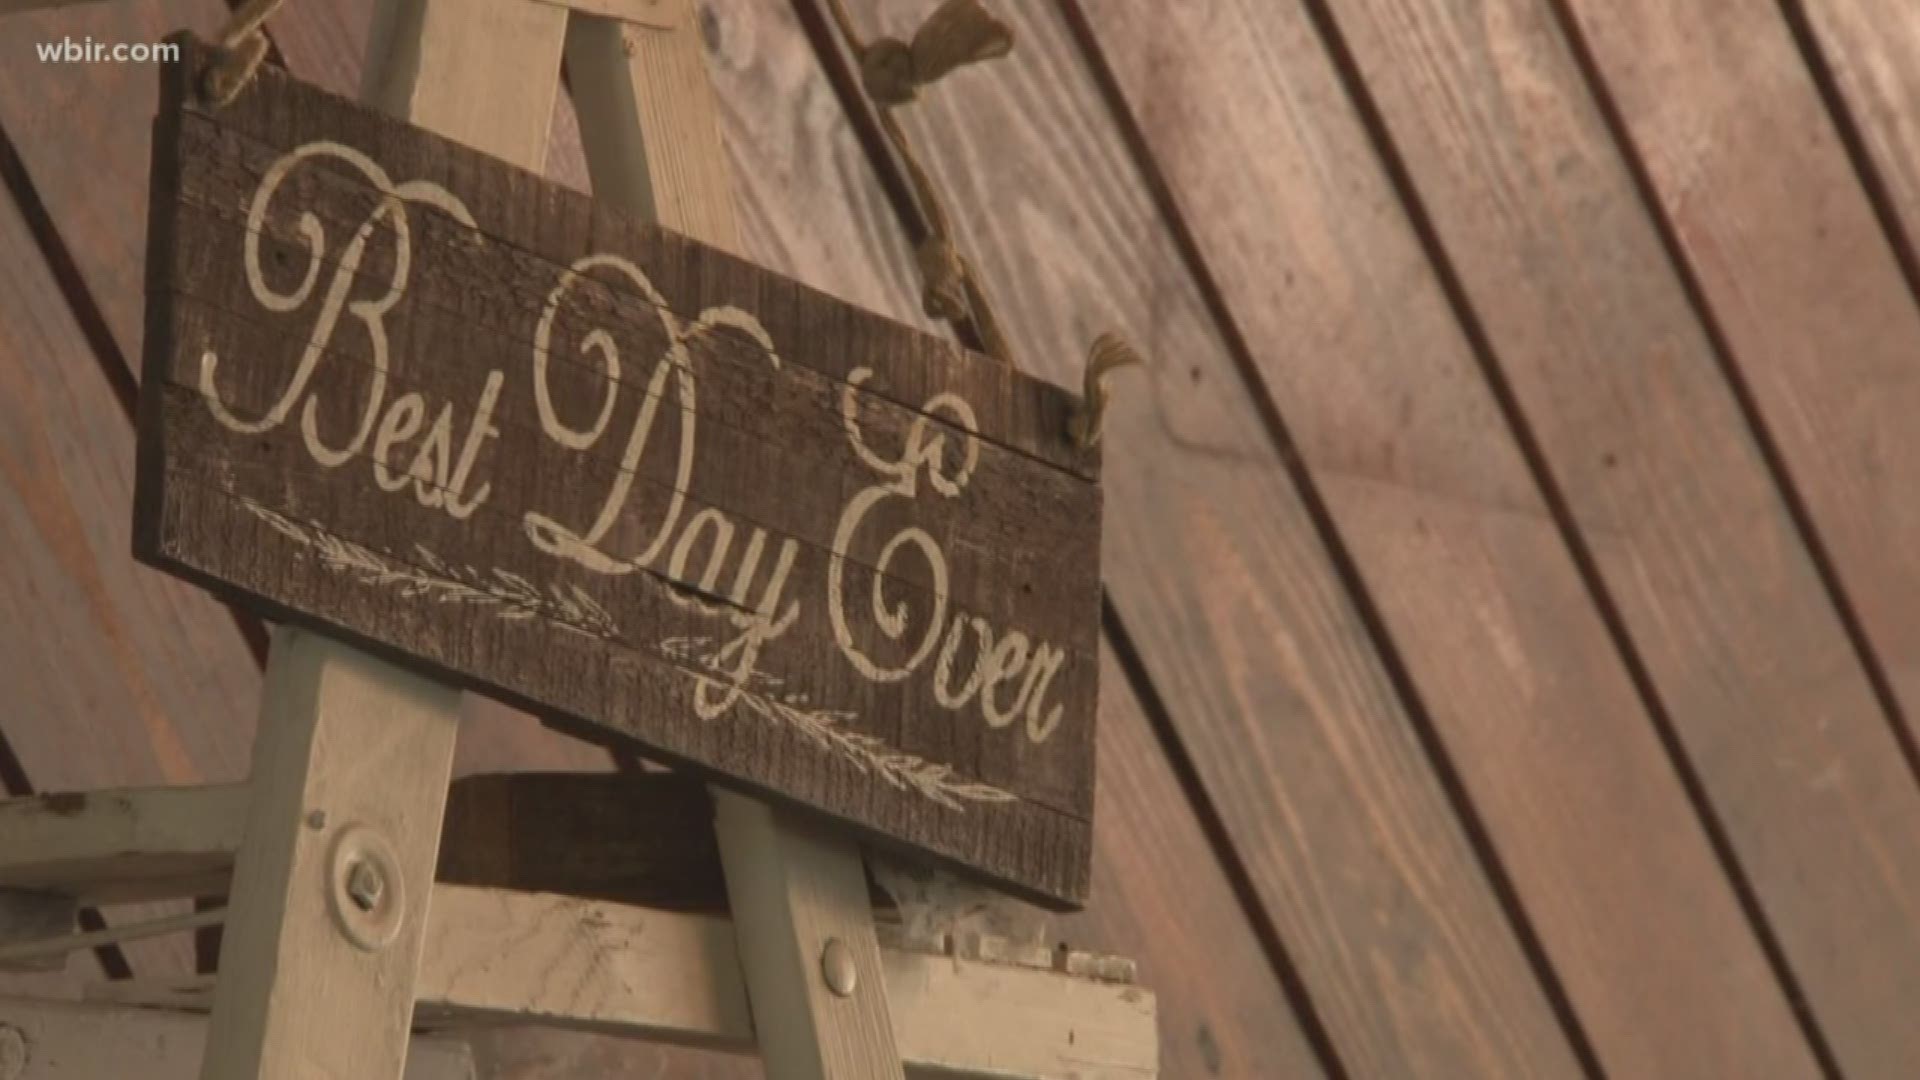 Couples across the nation are making the tough decision to cancel or postpone their weddings due to COVID-19.